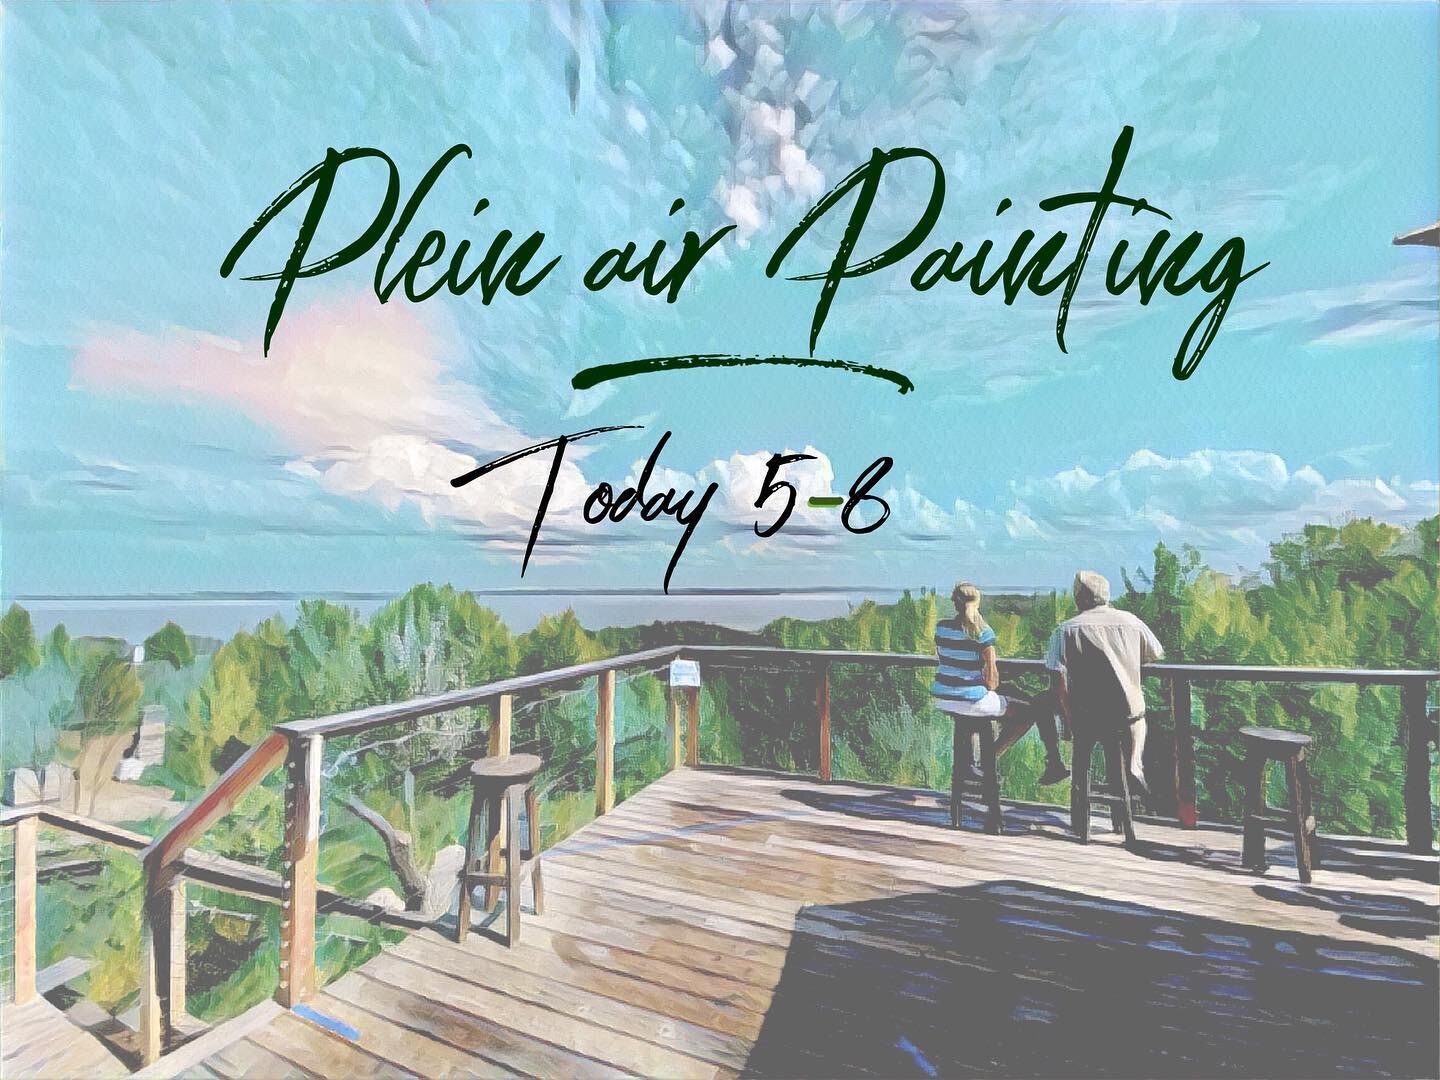 If you&rsquo;ve ever enjoyed watching Bob Ross paint, or love watching artists at work, then do we have a treat for you. Today from 5-8, grab a cider and watch any of the several talented artists from @paintgrandtraverse paint views around the proper